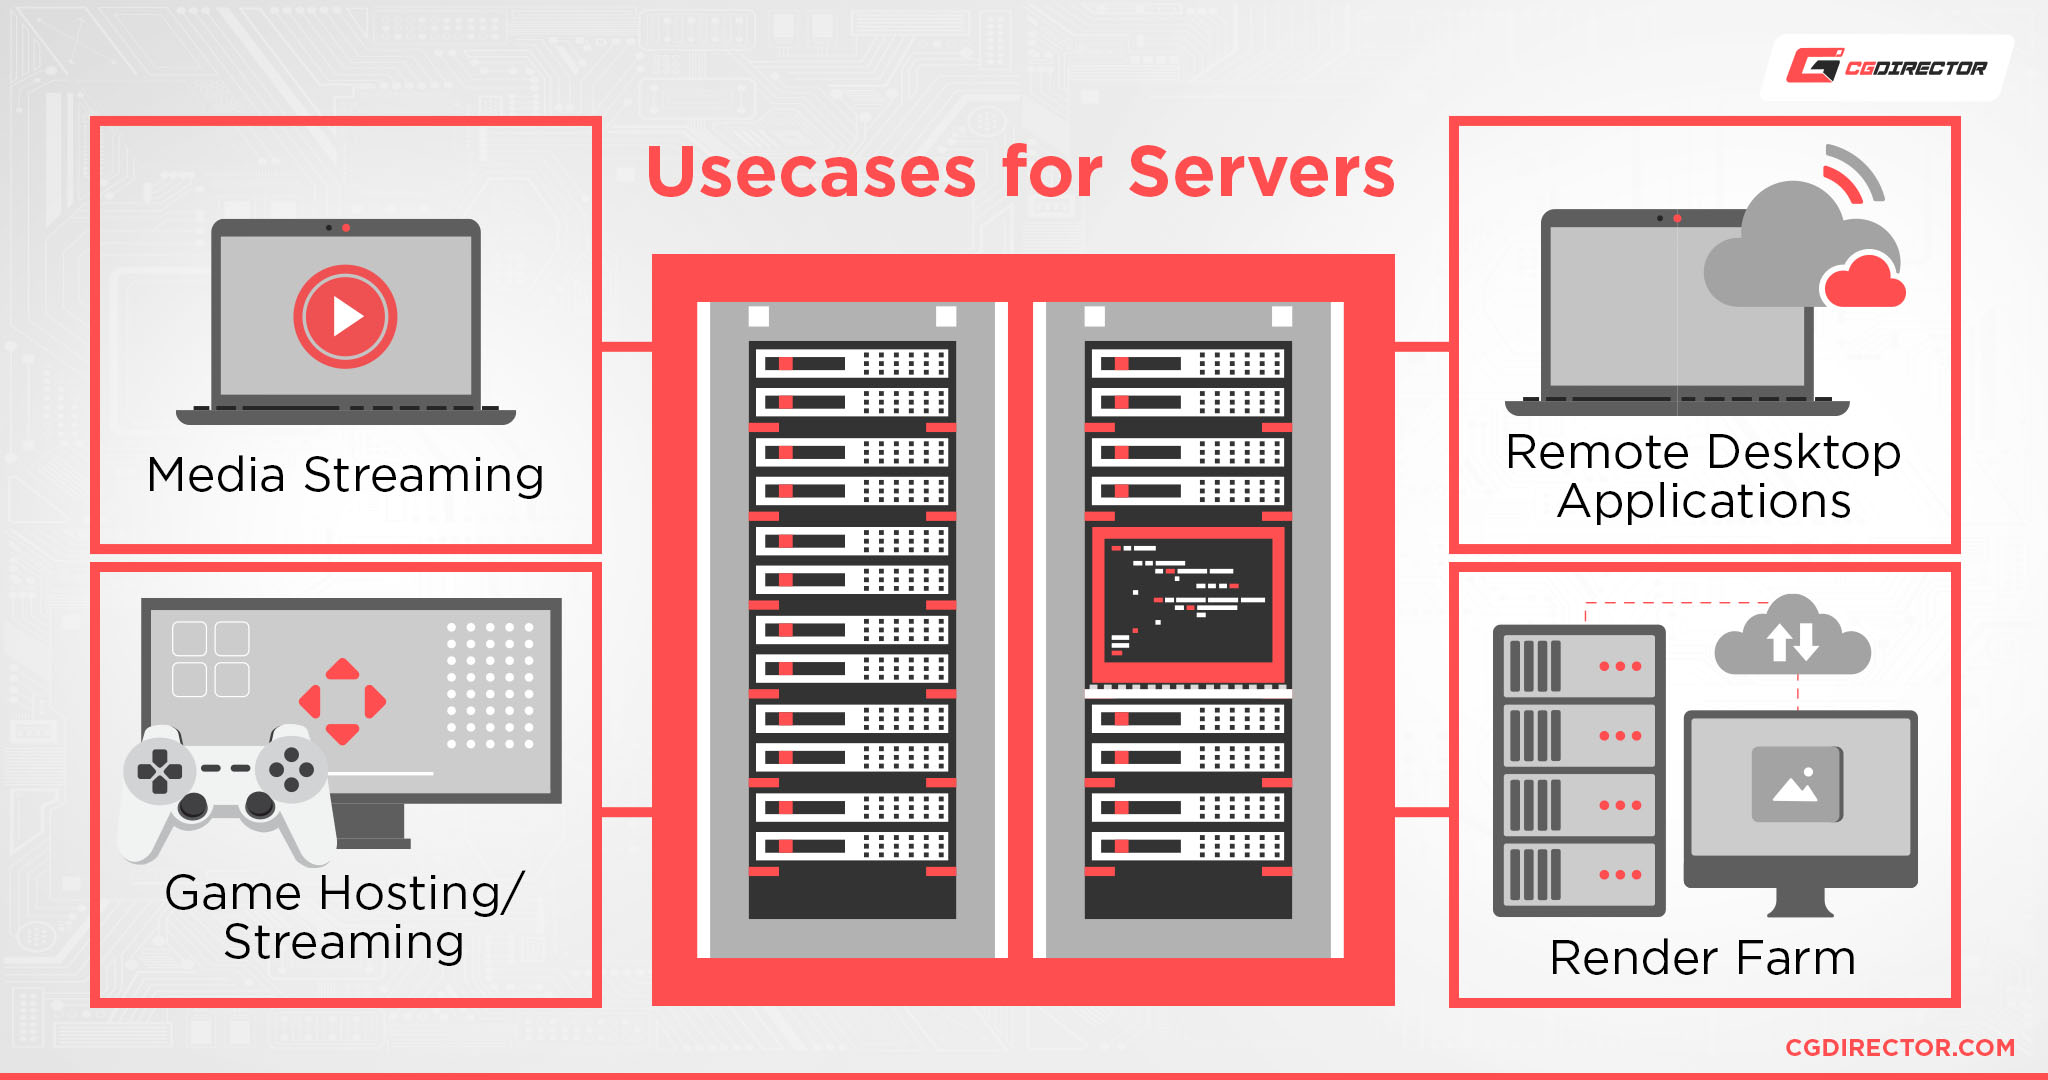 Usecases for Servers